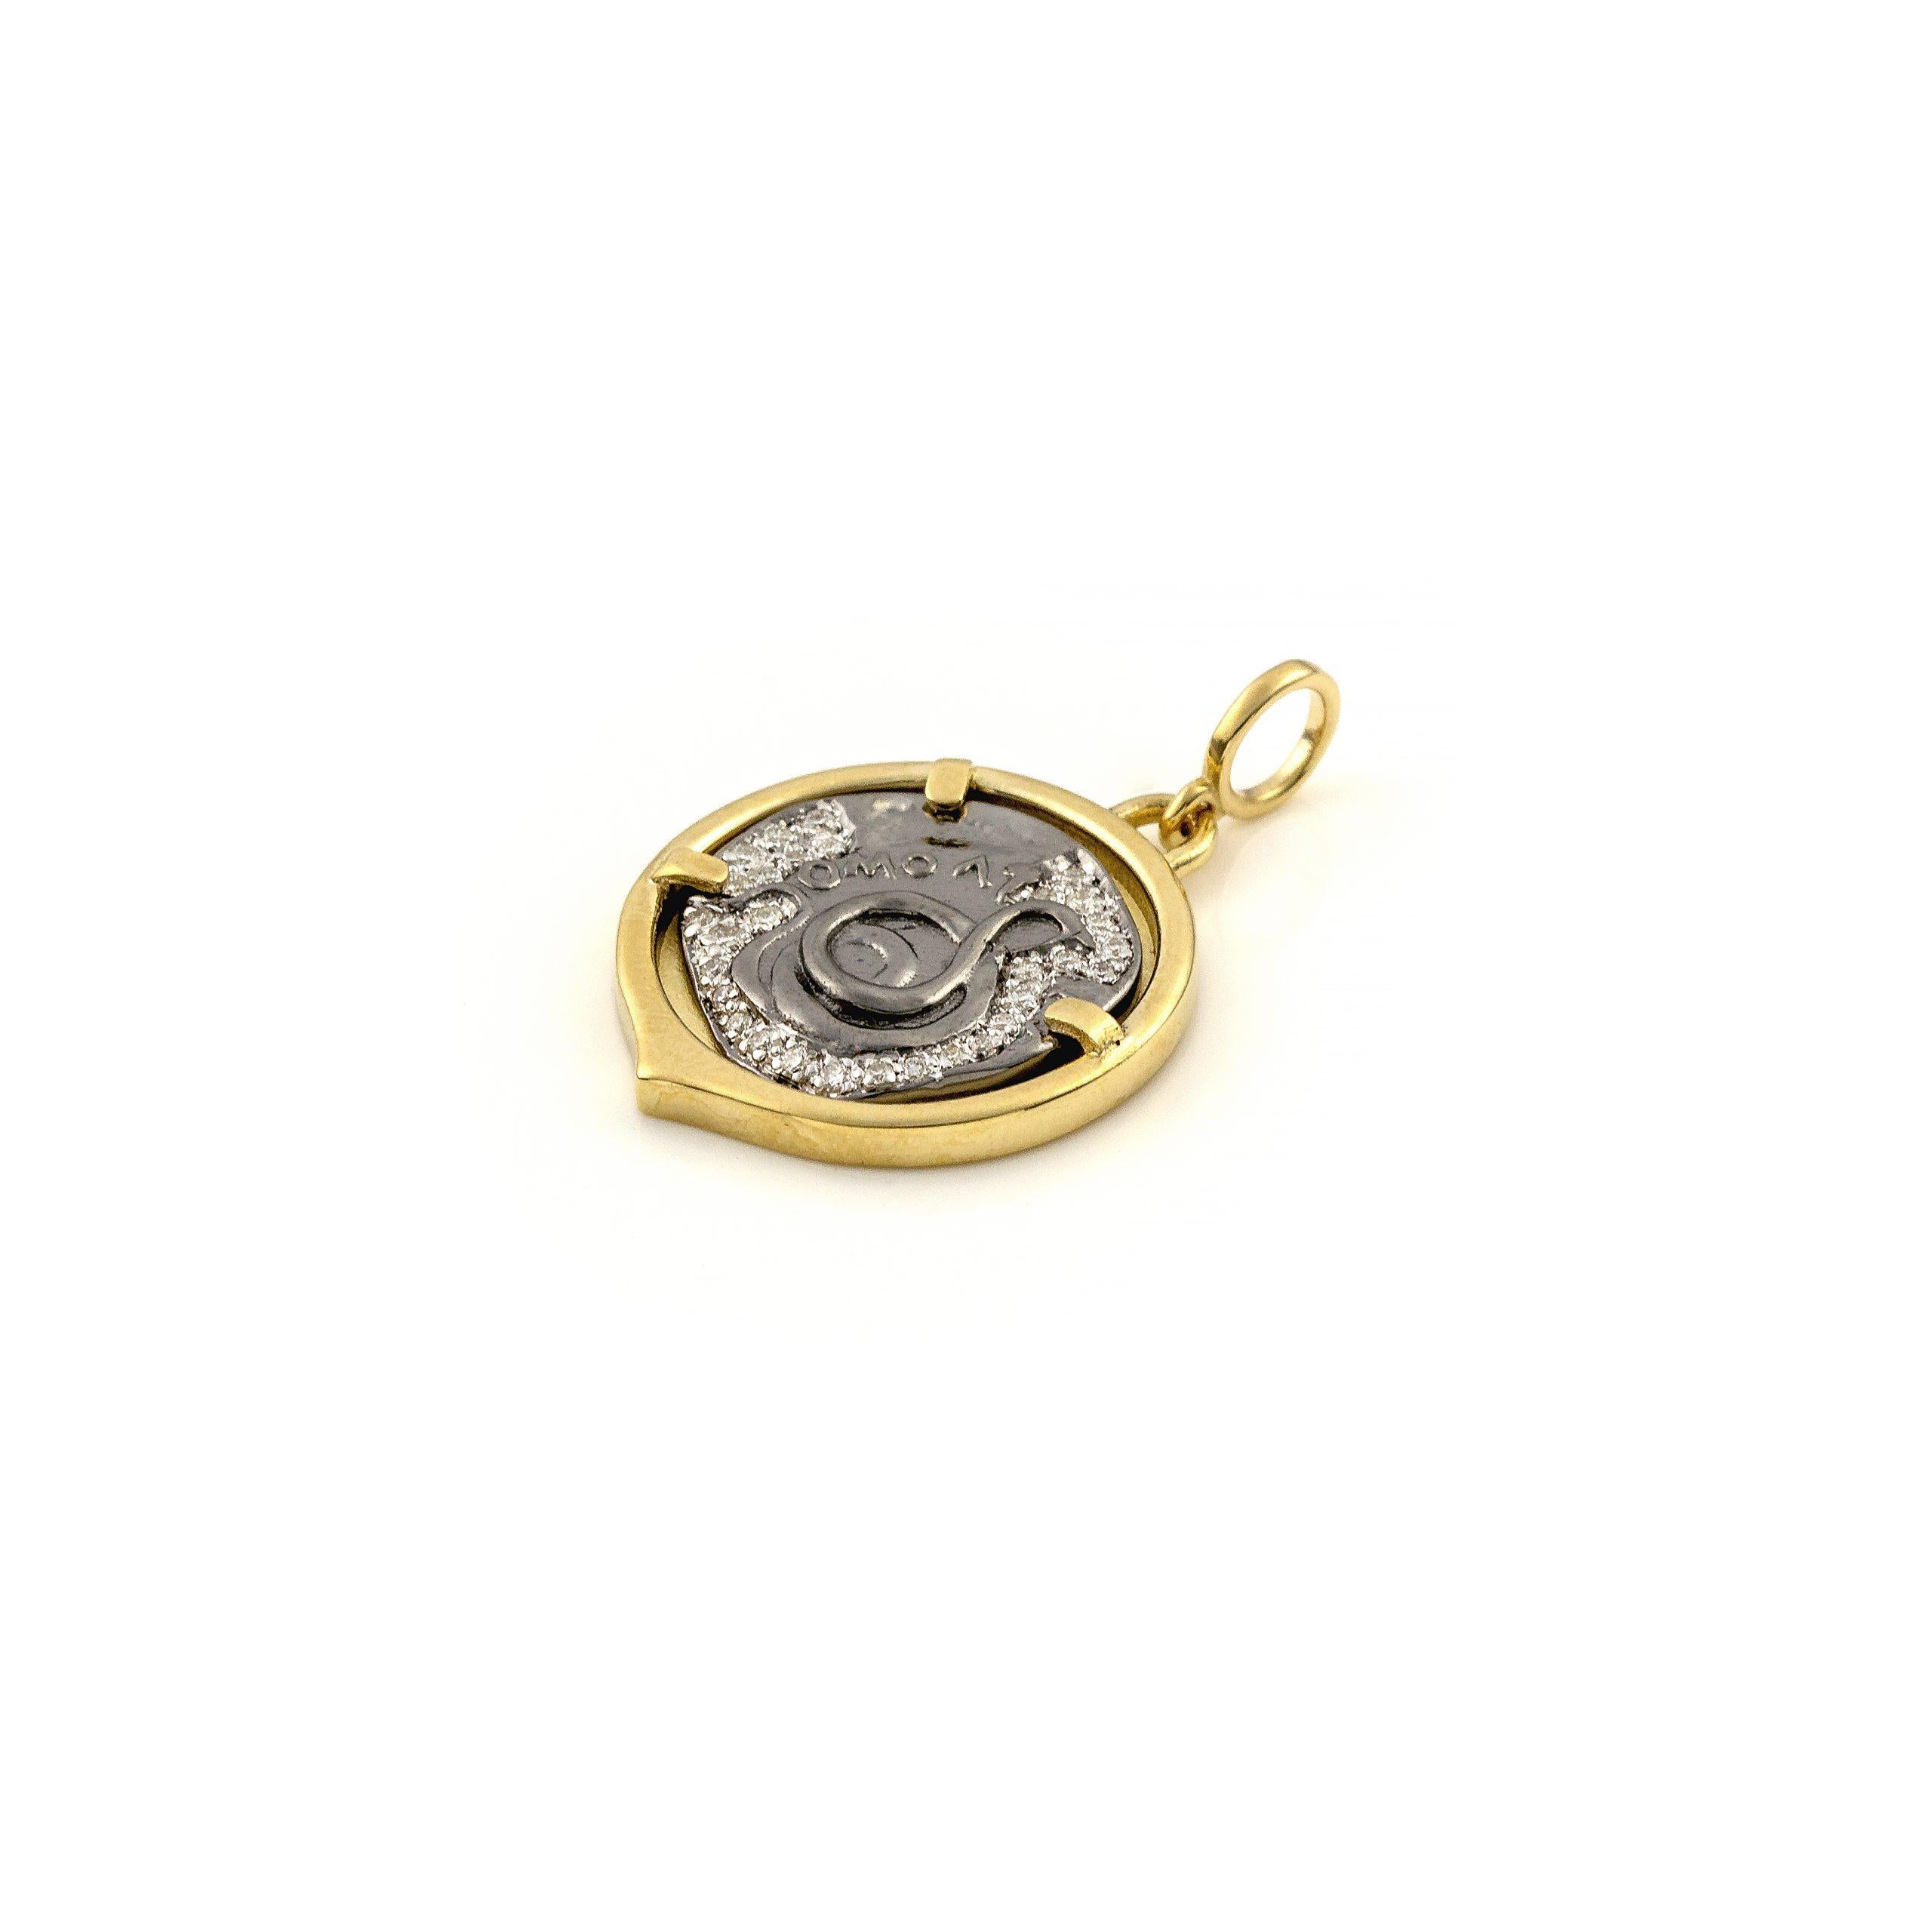 Recycled 14K Yellow Gold

Sterling silver Rhodium plated

Diamonds Approx. 0.15 ct

Jewel size: 2.8×1.9 cm/ 1.1×0.79 inches
The pendant is sold WITHOUT a chain.

Serpent Coin Pendant in Golden Case in Diamonds .

Asclepius, the father of medicine,